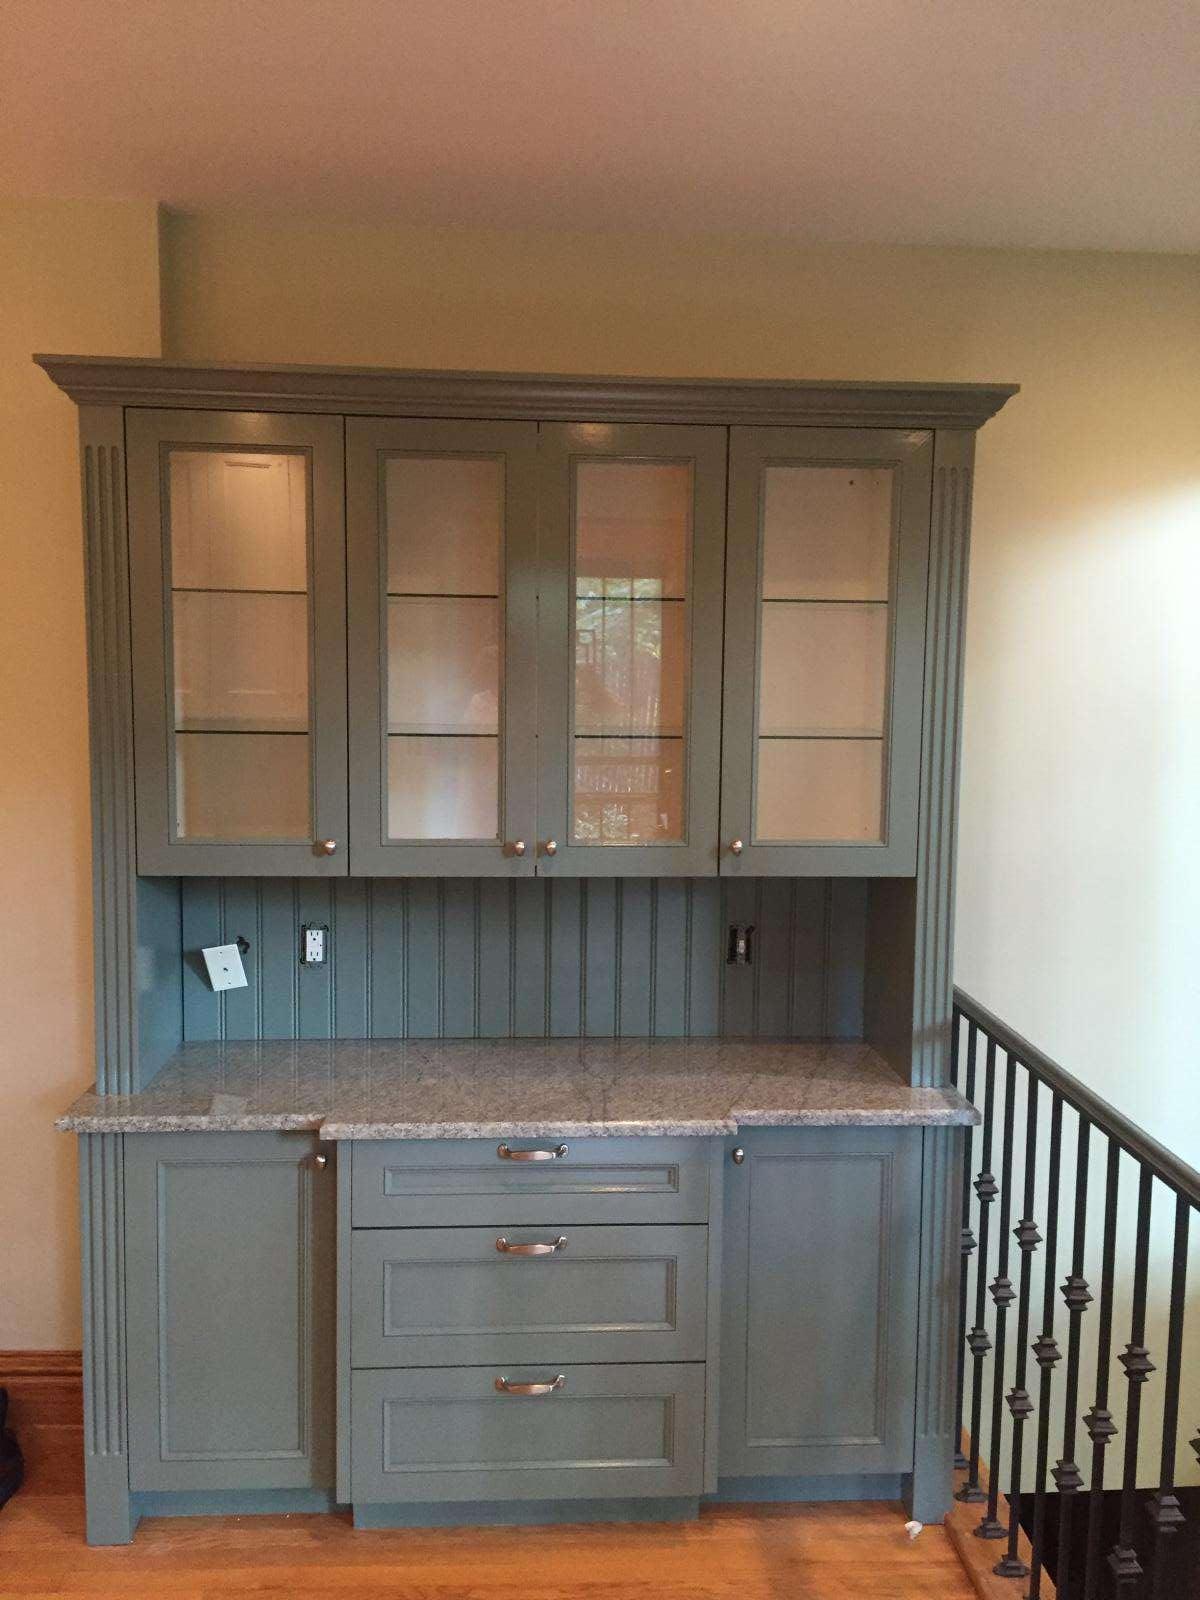 Repainted cabinets